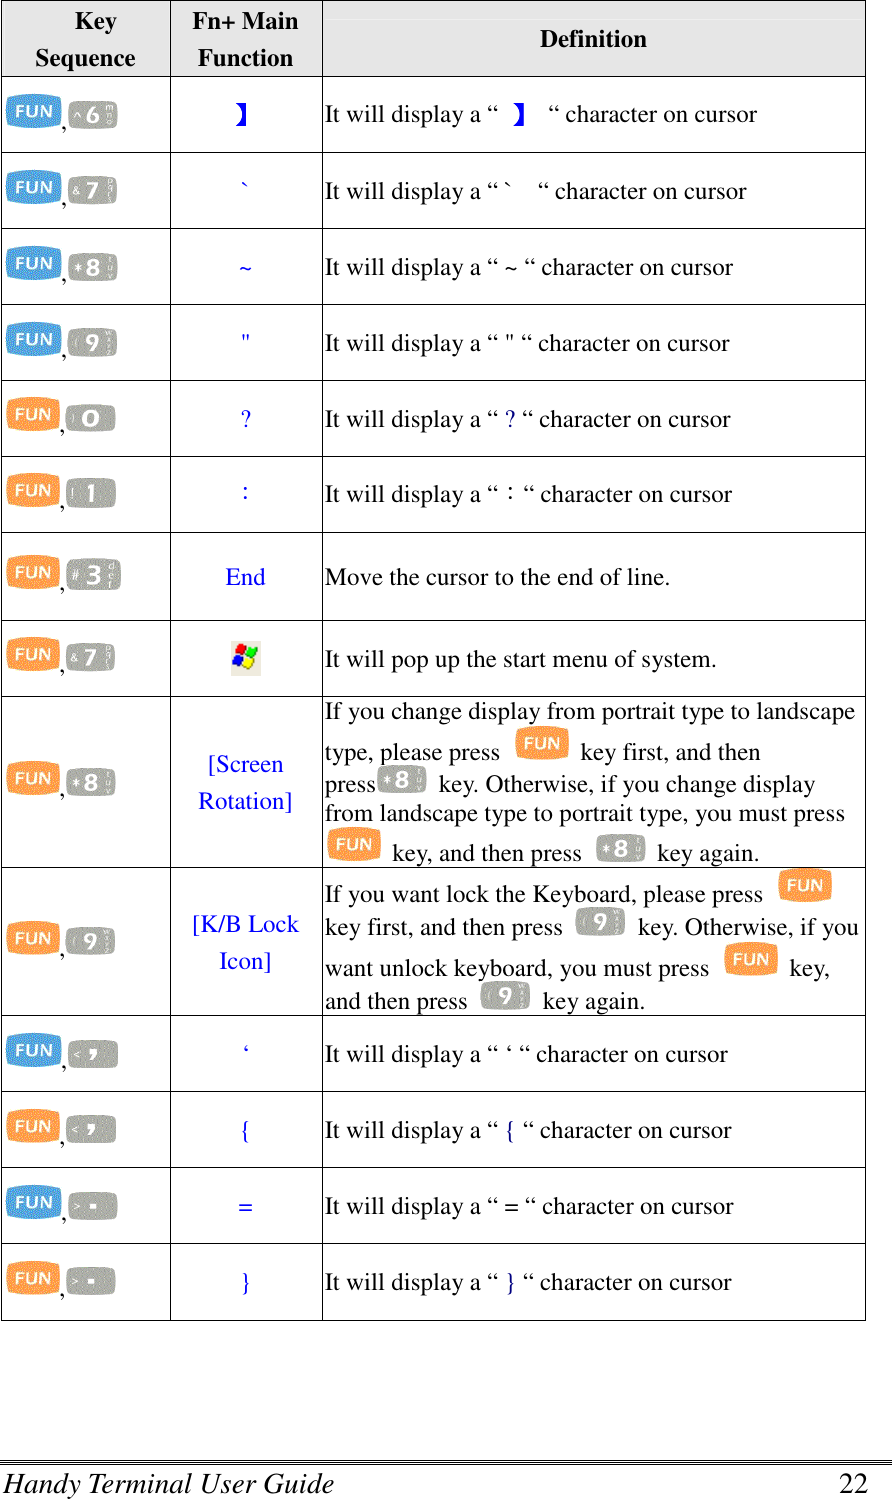 Handy Terminal User Guide      22 Key Sequence Fn+ Main Function Definition ,   】】】】 It will display a “  】】】】 “ character on cursor   ,   ` It will display a “ `    “ character on cursor ,   ~ It will display a “ ~ “ character on cursor ,   &quot; It will display a “ &quot; “ character on cursor ,   ? It will display a “ ? “ character on cursor ,   ： It will display a “：“ character on cursor ,   End Move the cursor to the end of line. ,    It will pop up the start menu of system. ,   [Screen Rotation] If you change display from portrait type to landscape type, please press    key first, and then press   key. Otherwise, if you change display from landscape type to portrait type, you must press   key, and then press    key again. ,   [K/B Lock Icon] If you want lock the Keyboard, please press   key first, and then press   key. Otherwise, if you want unlock keyboard, you must press    key, and then press    key again. ,   ‘ It will display a “ ‘ “ character on cursor ,   { It will display a “ { “ character on cursor ,   = It will display a “ = “ character on cursor ,   } It will display a “ } “ character on cursor  